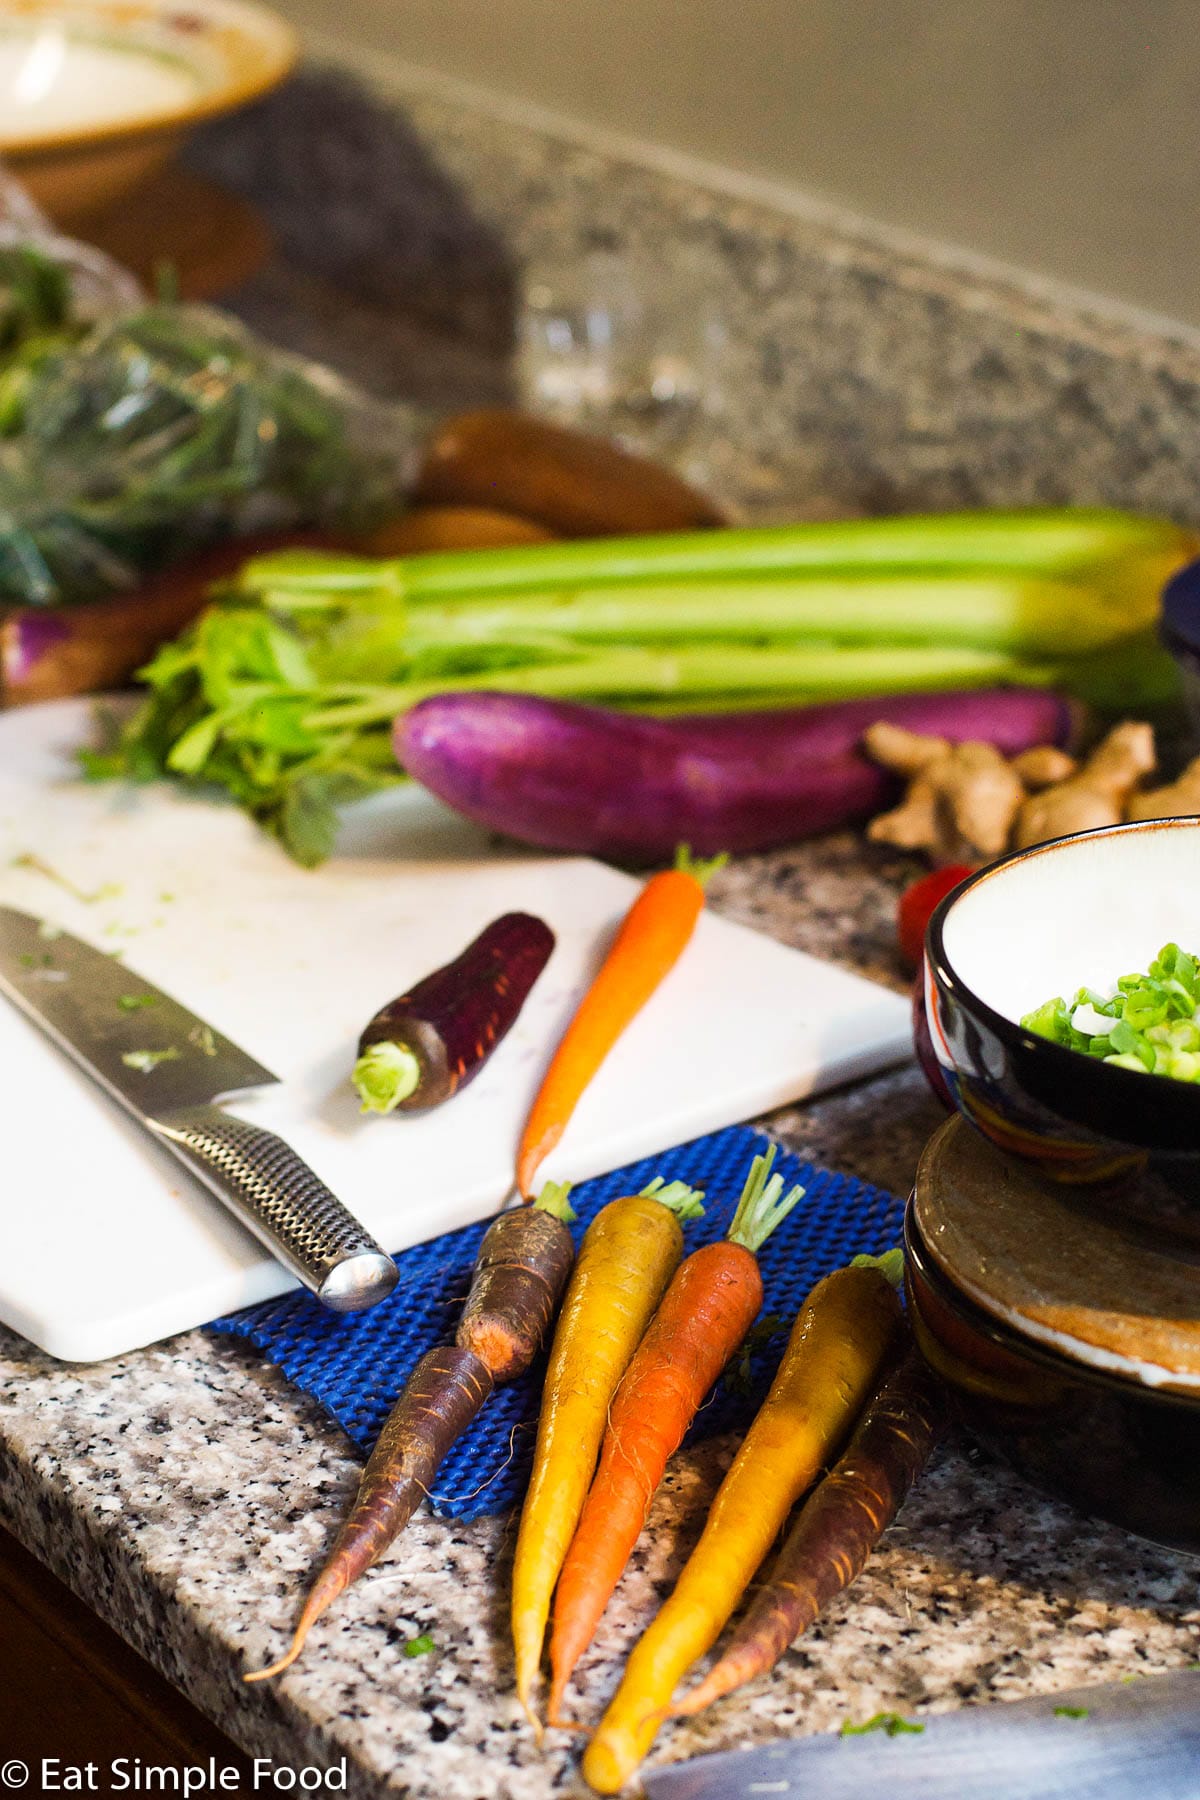 Colorful carrots, celery, and eggplant near a white cutting board with a chef's knife getting ready to be cut.